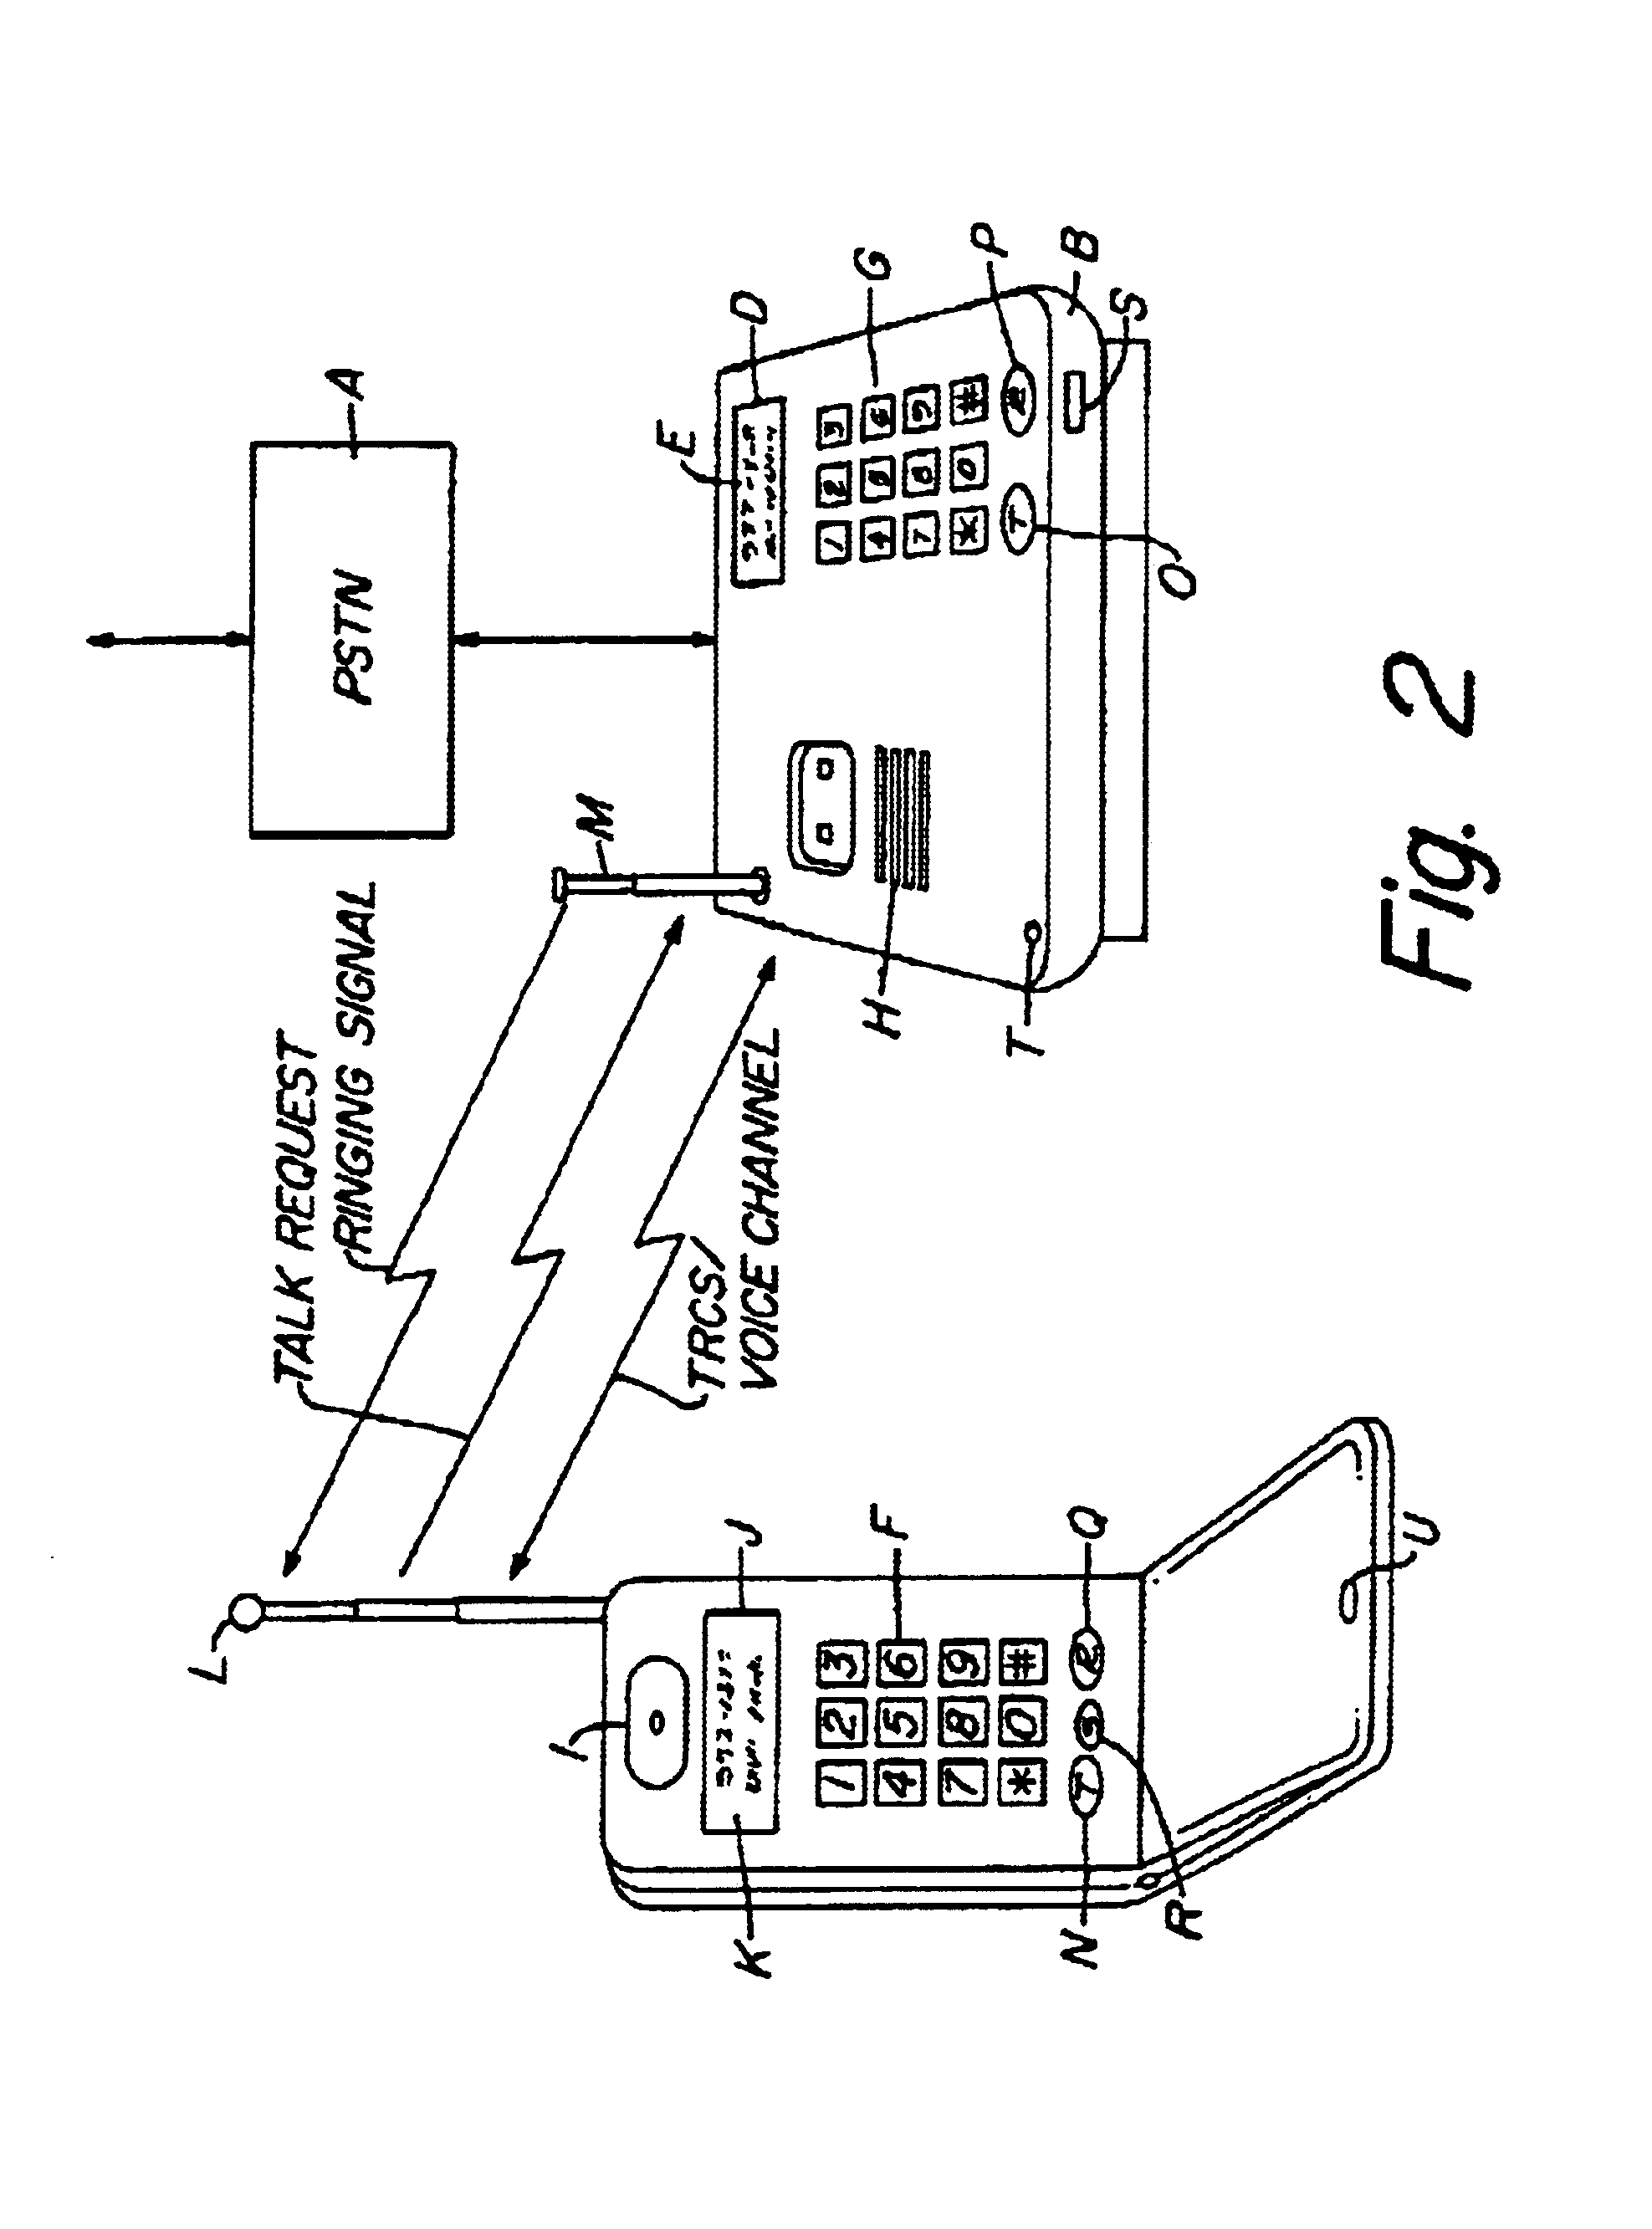 Method and apparatus for an improved call interrupt feature in a cordless telephone answering device